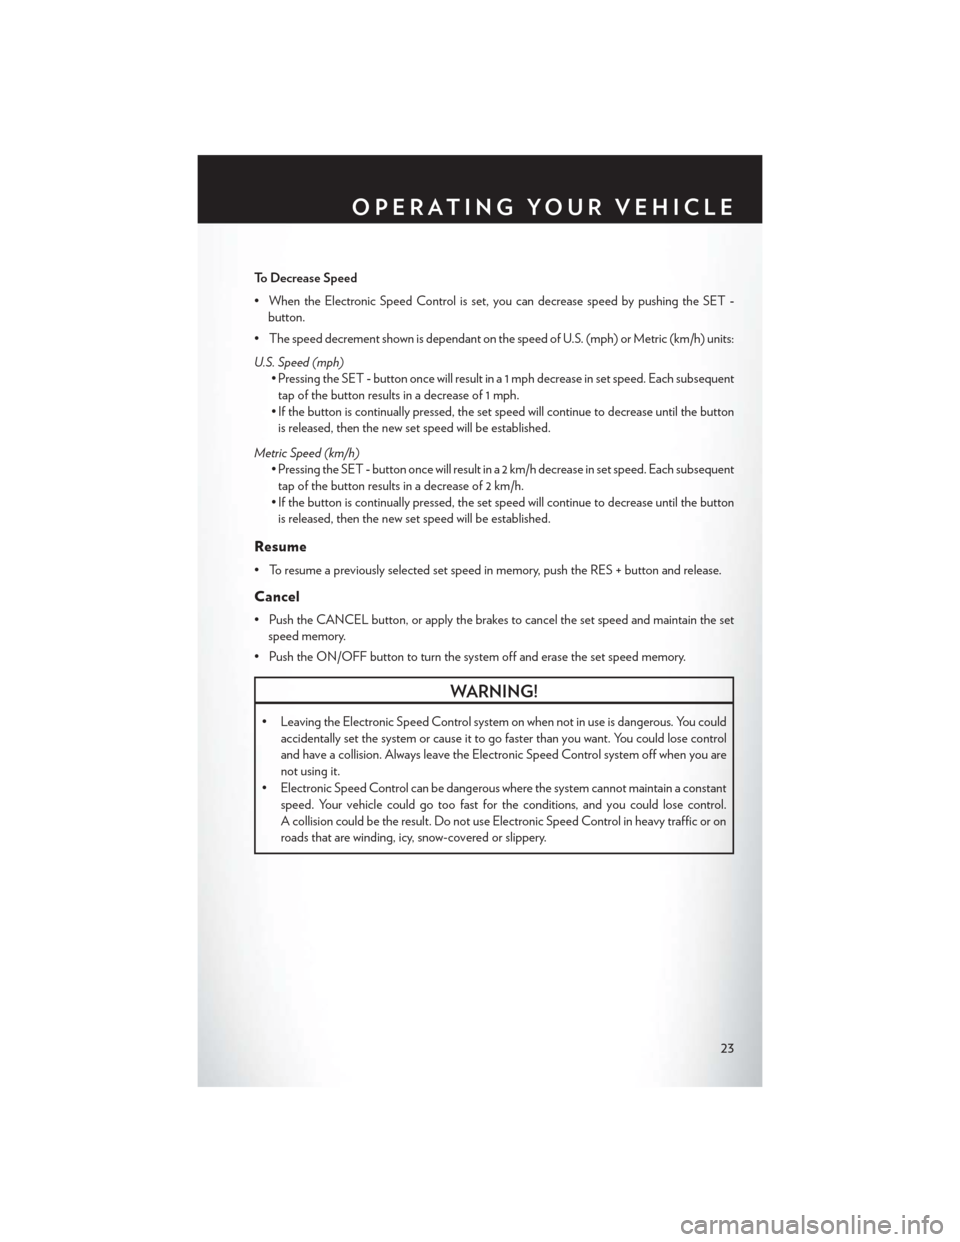 CHRYSLER 200 2014 1.G Owners Manual To Decrease Speed
• When the Electronic Speed Control is set, you can decrease speed by pushing the SET-
button.
• The speed decrement shown is dependant on the speed of U.S. (mph) or Metric (km/h